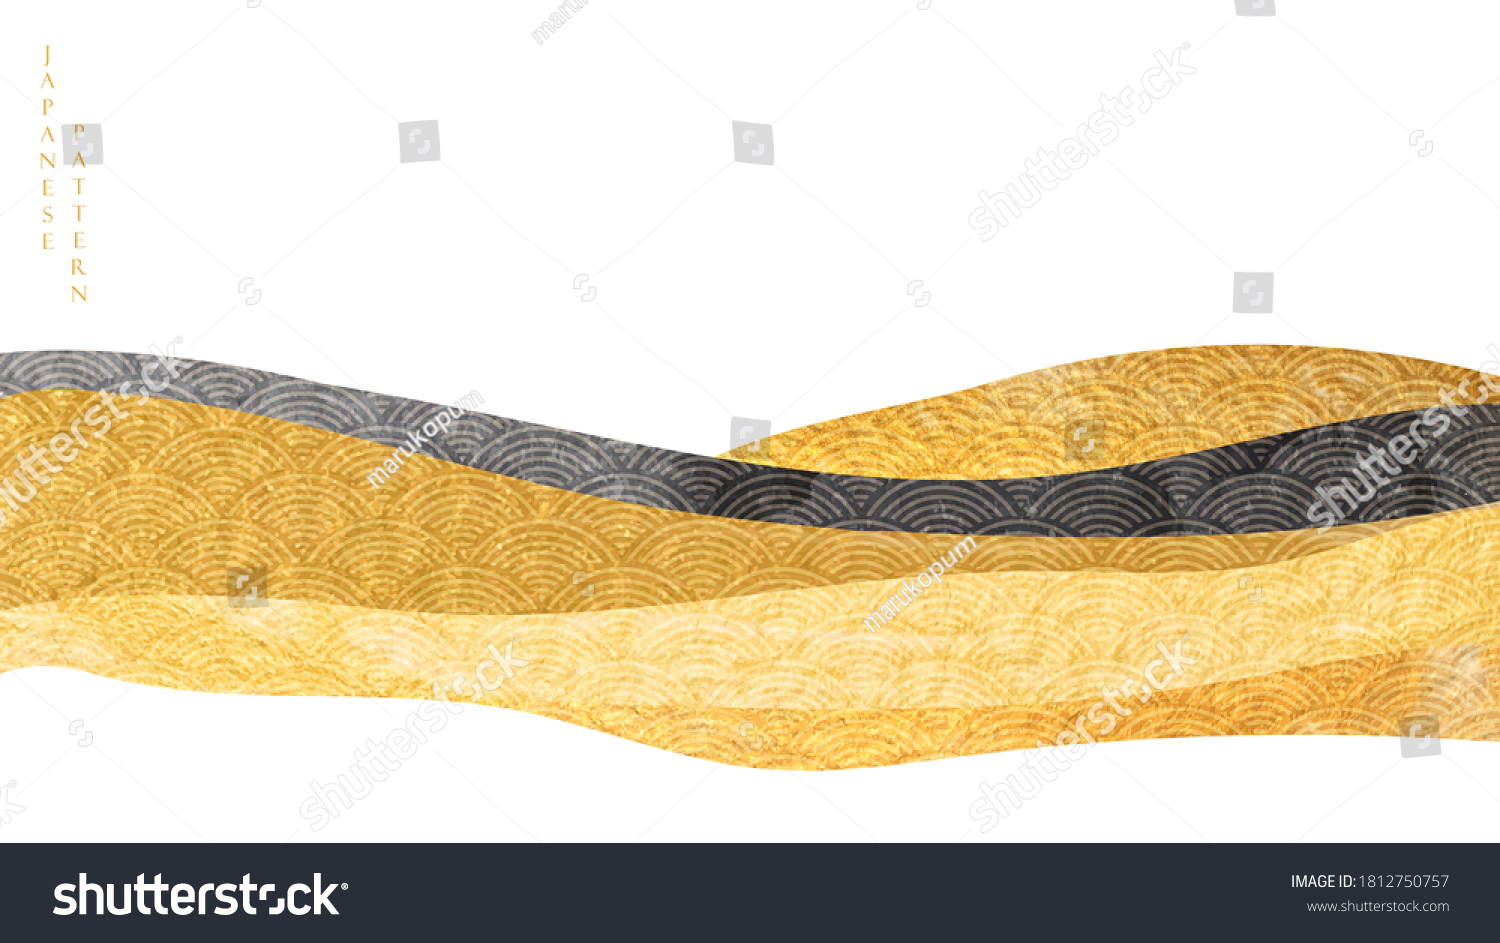 Art landscape background with gold texture vector. Japanese wave pattern with mountain banner in oriental style. #1812750757